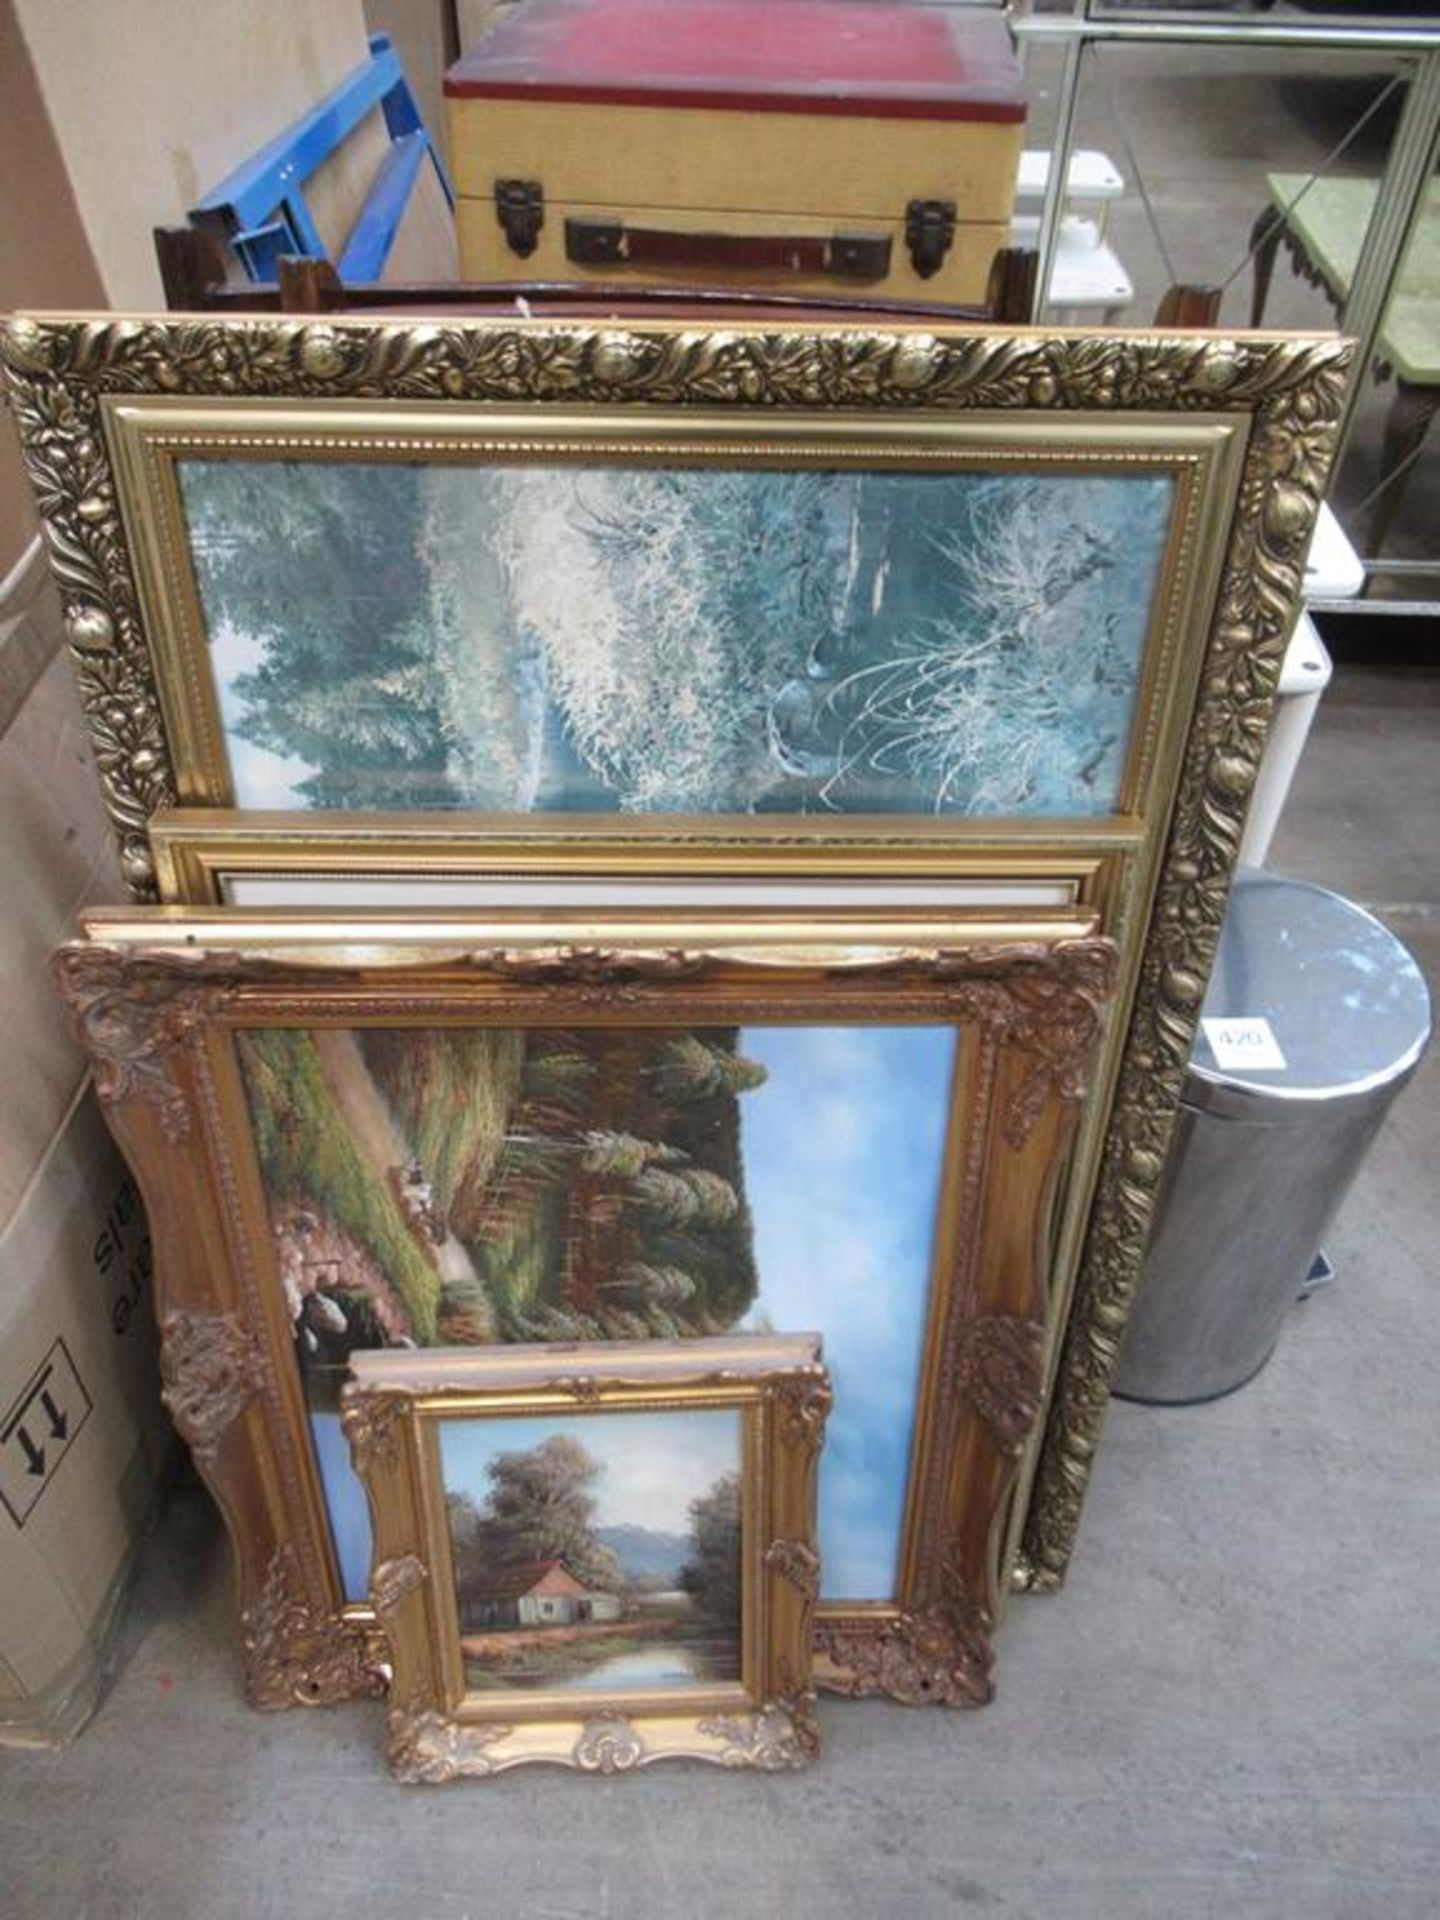 Miscellaneous items including framed art, table companion set etc. - Image 2 of 4